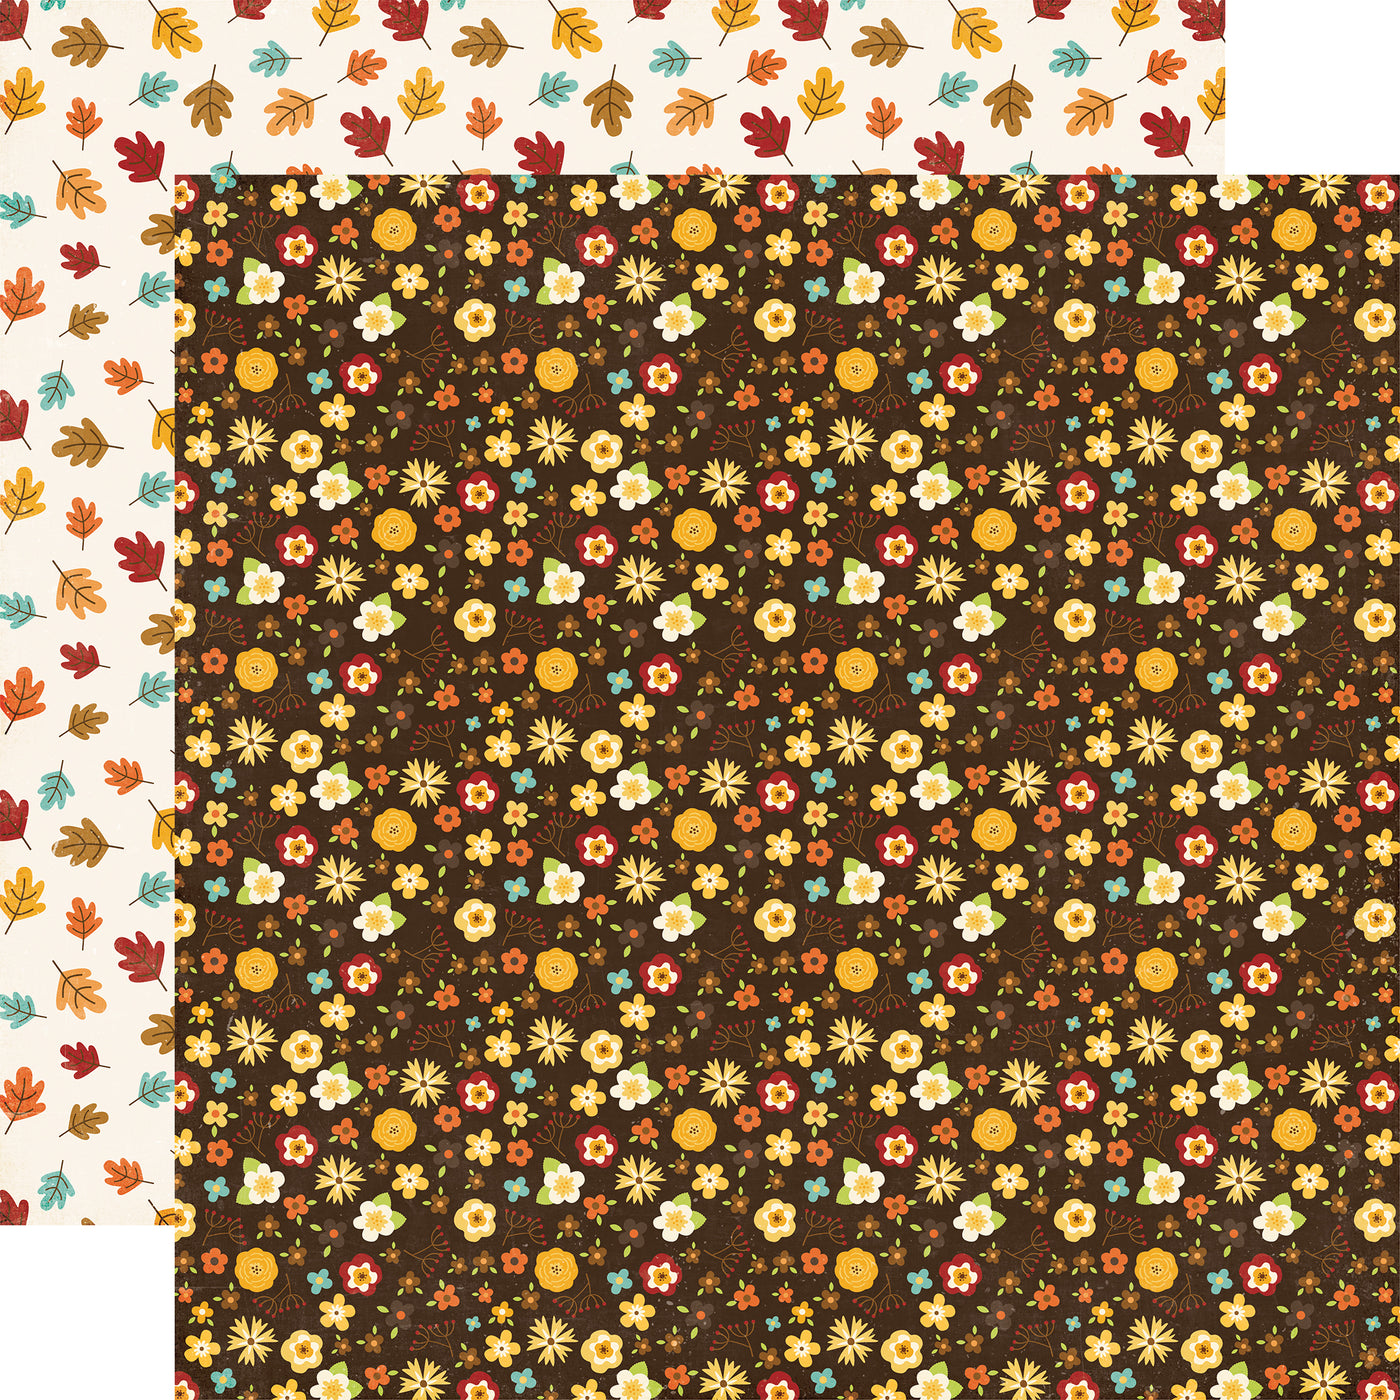 Multi-Colored (Side A - petite floral spray in fall colors on a deep brown background, Side B - leaves in fall colors on a cream background)